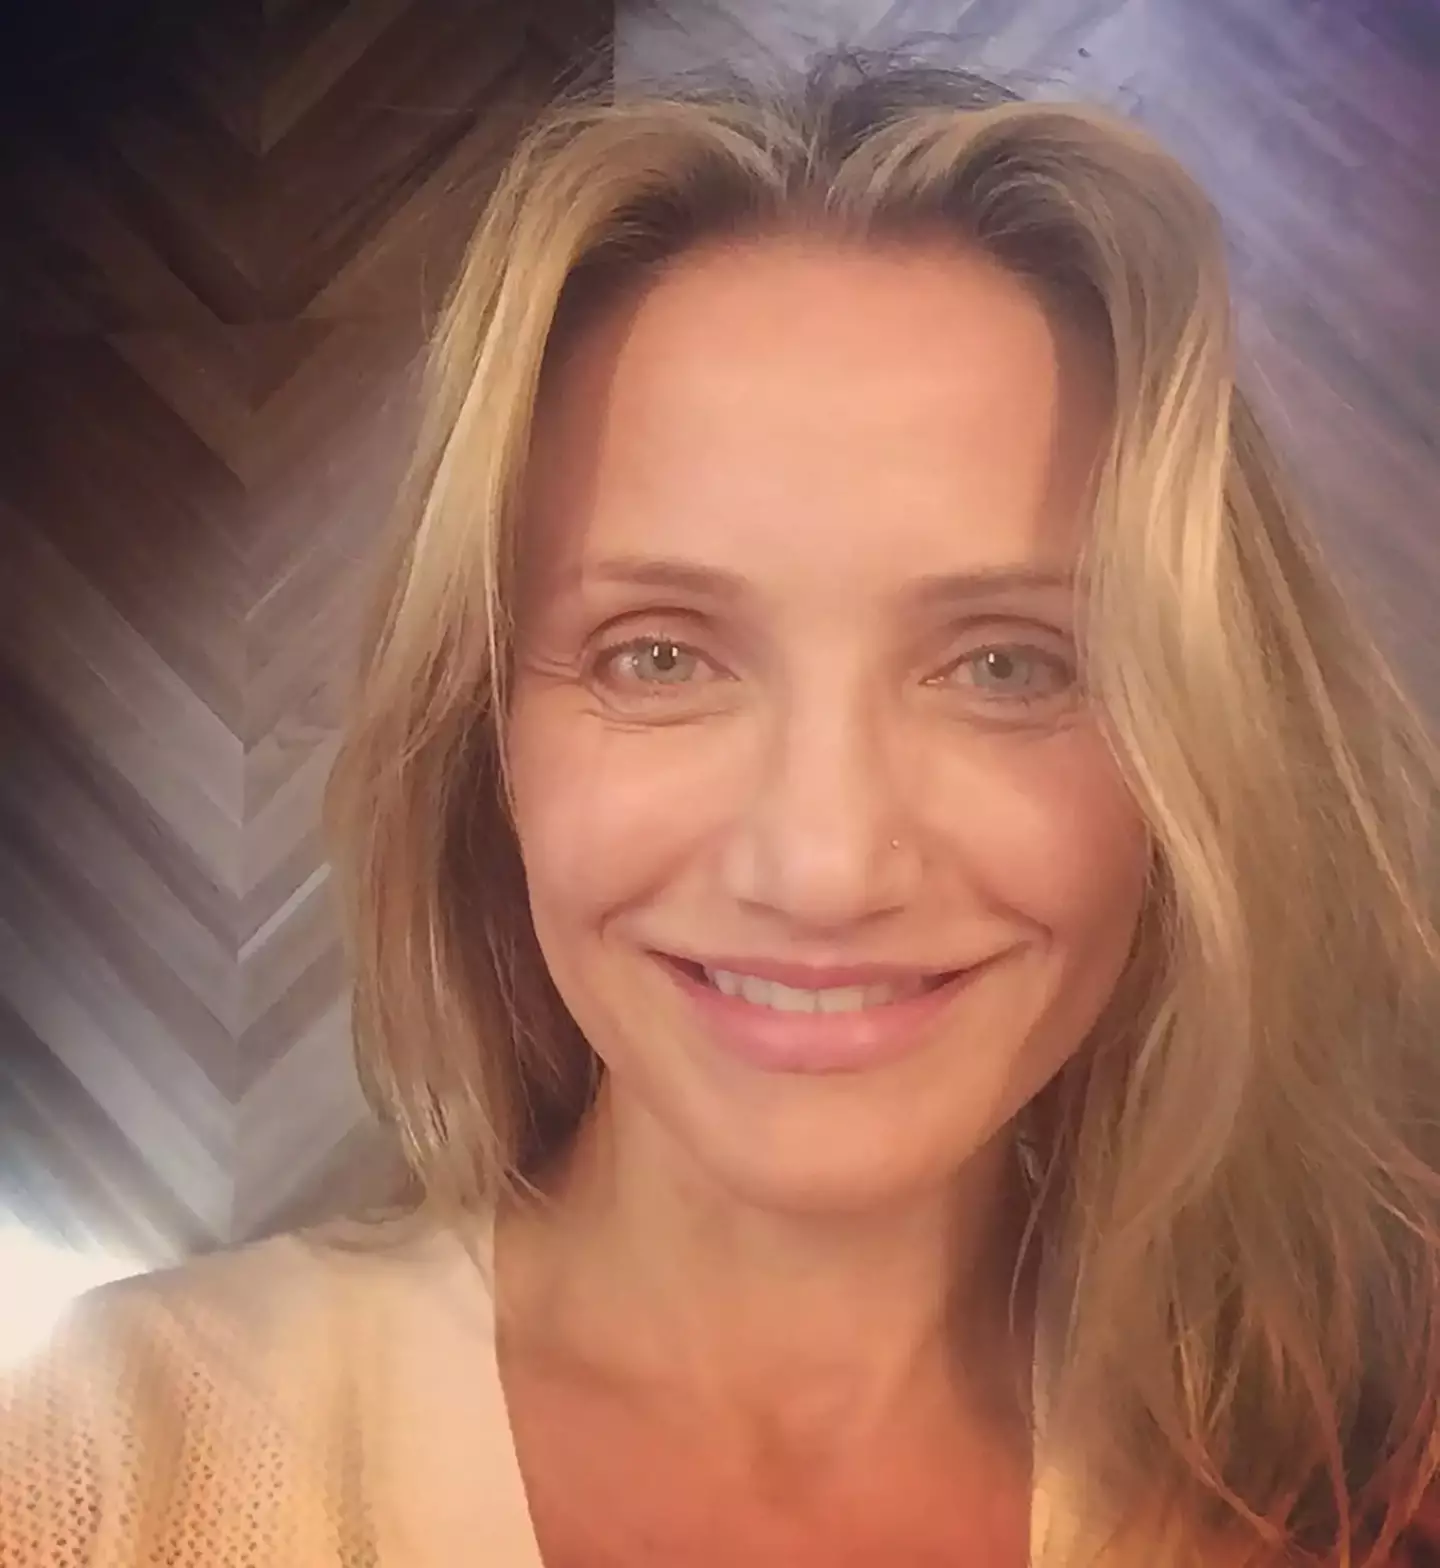 There's no denying that Cameron Diaz's skin is stunning.